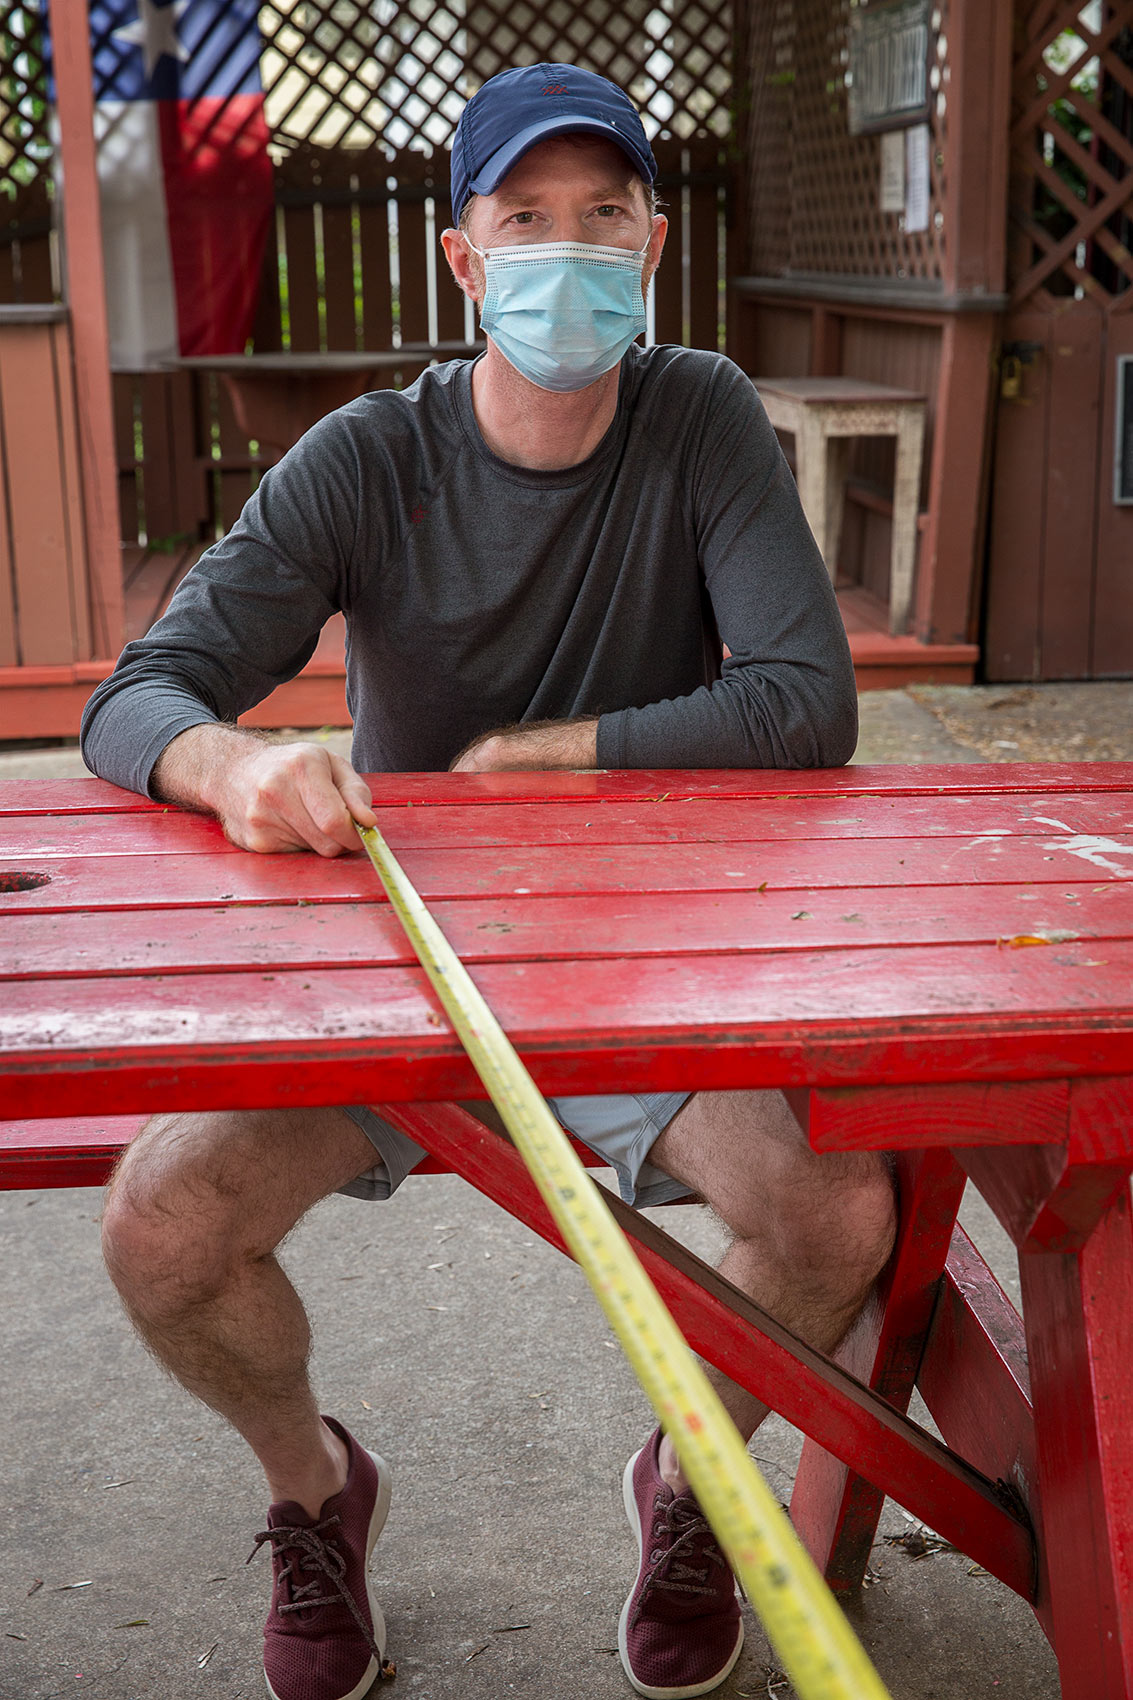 Man wearing a mask sits at a red picnic table with a long tape measure that is a symbol of Covid-19 social distance